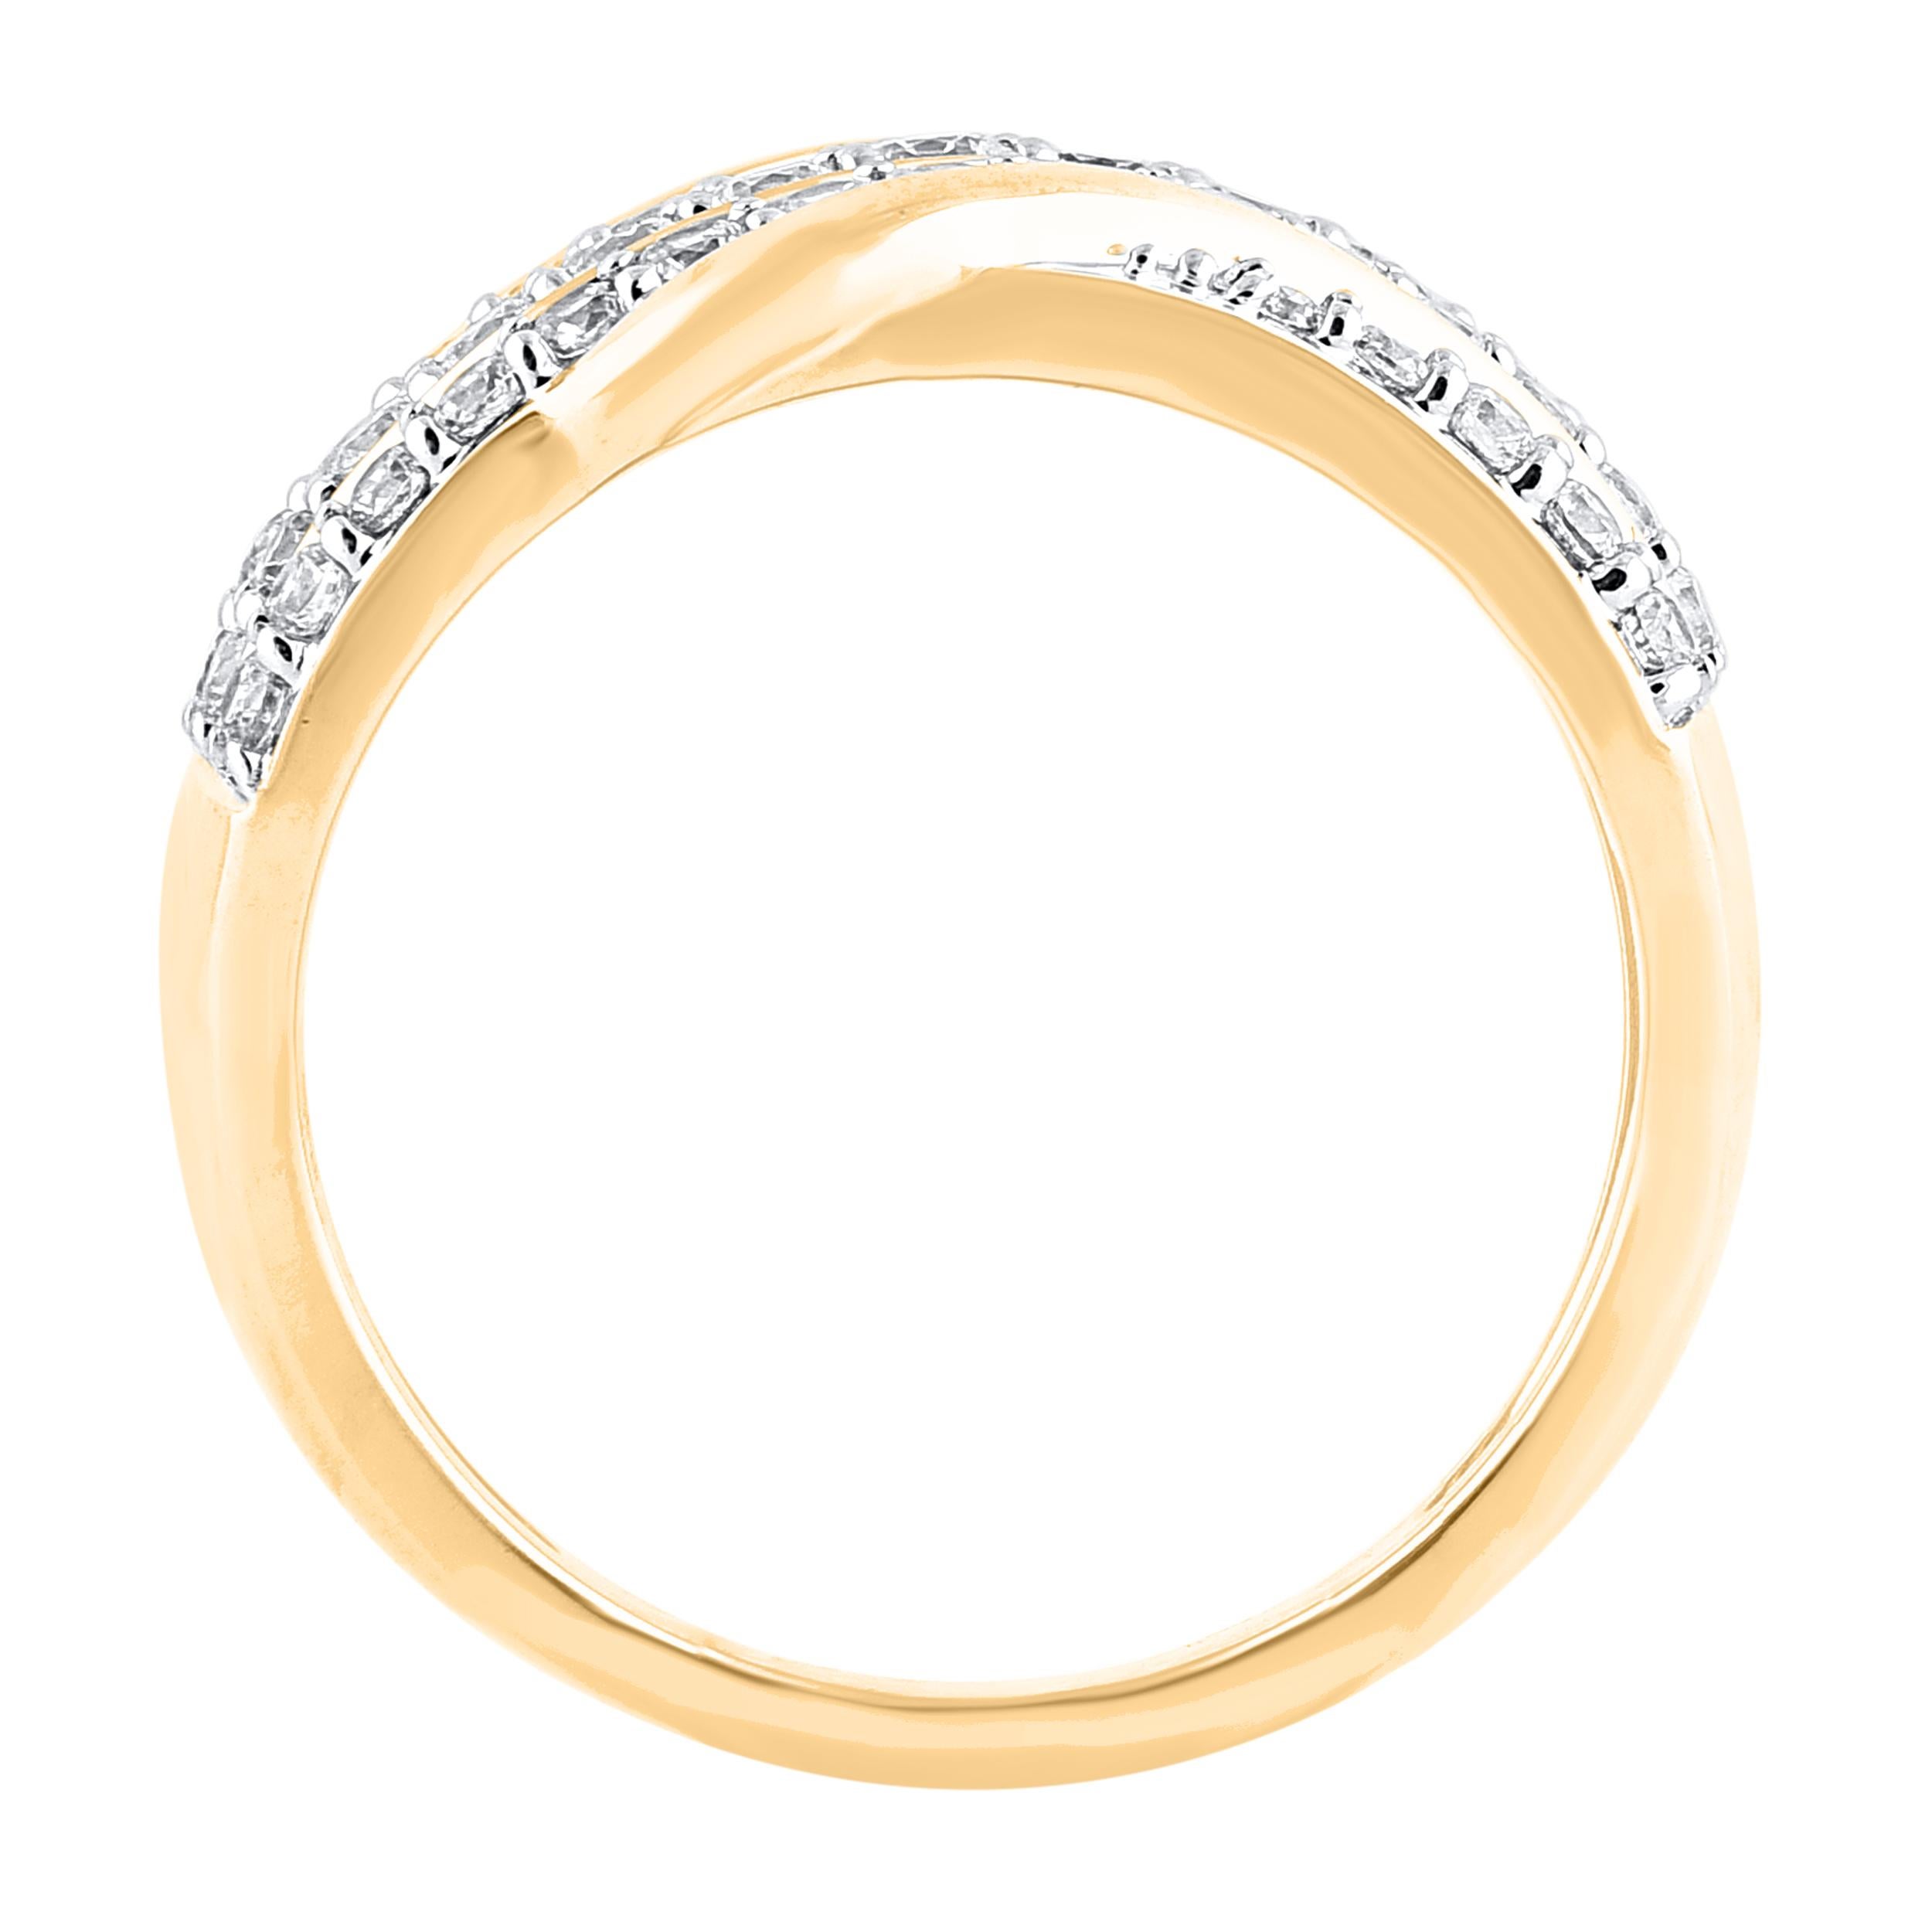 Truly exquisite, this diamond engagement band is sure to be admired for the inherent classic beauty and elegance within its design. The total weight of diamonds 1.0 carat, H-I color, I-2 Clarity. This ring is beautifully crafted in 14 Karat yellow